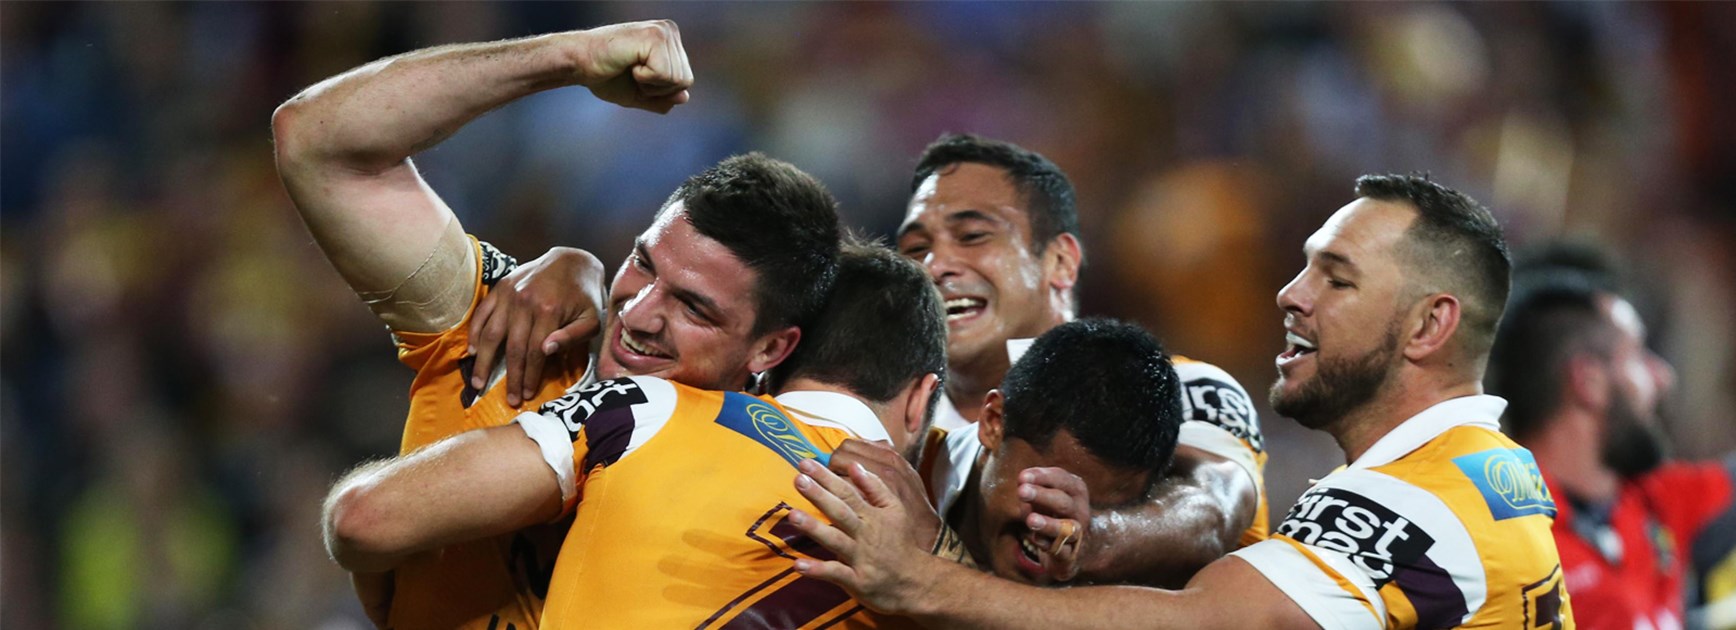 The Broncos celebrate an early try against the Cowboys in the first week of the finals.